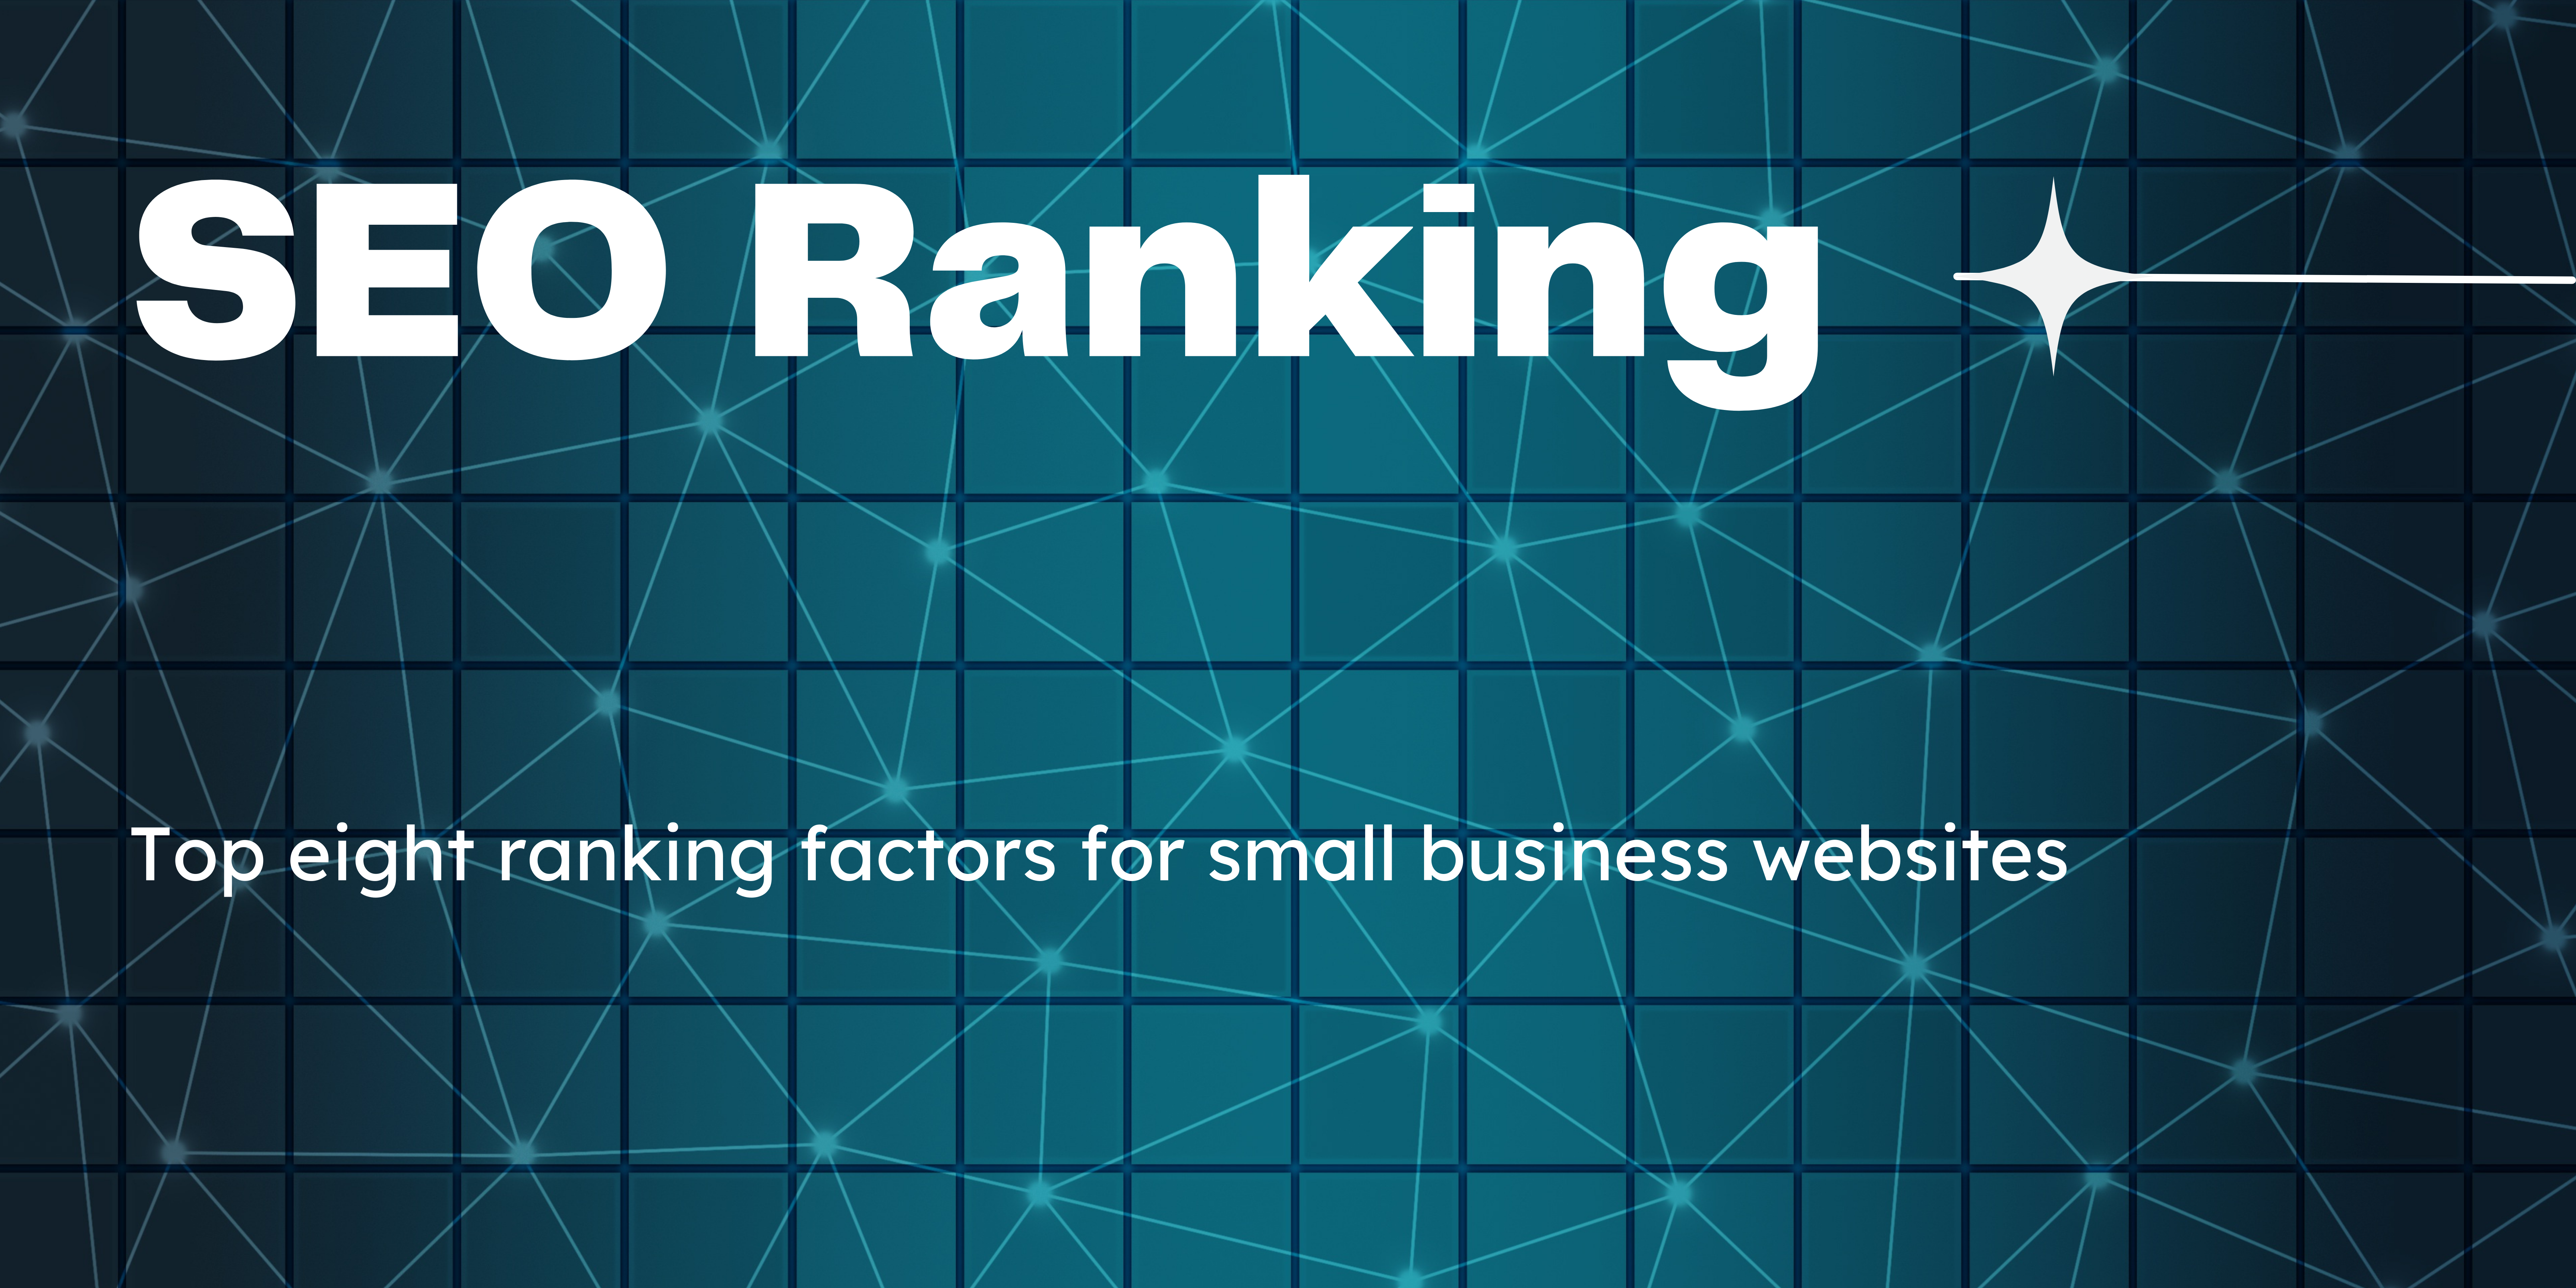 Top eight ranking factors for small business websites